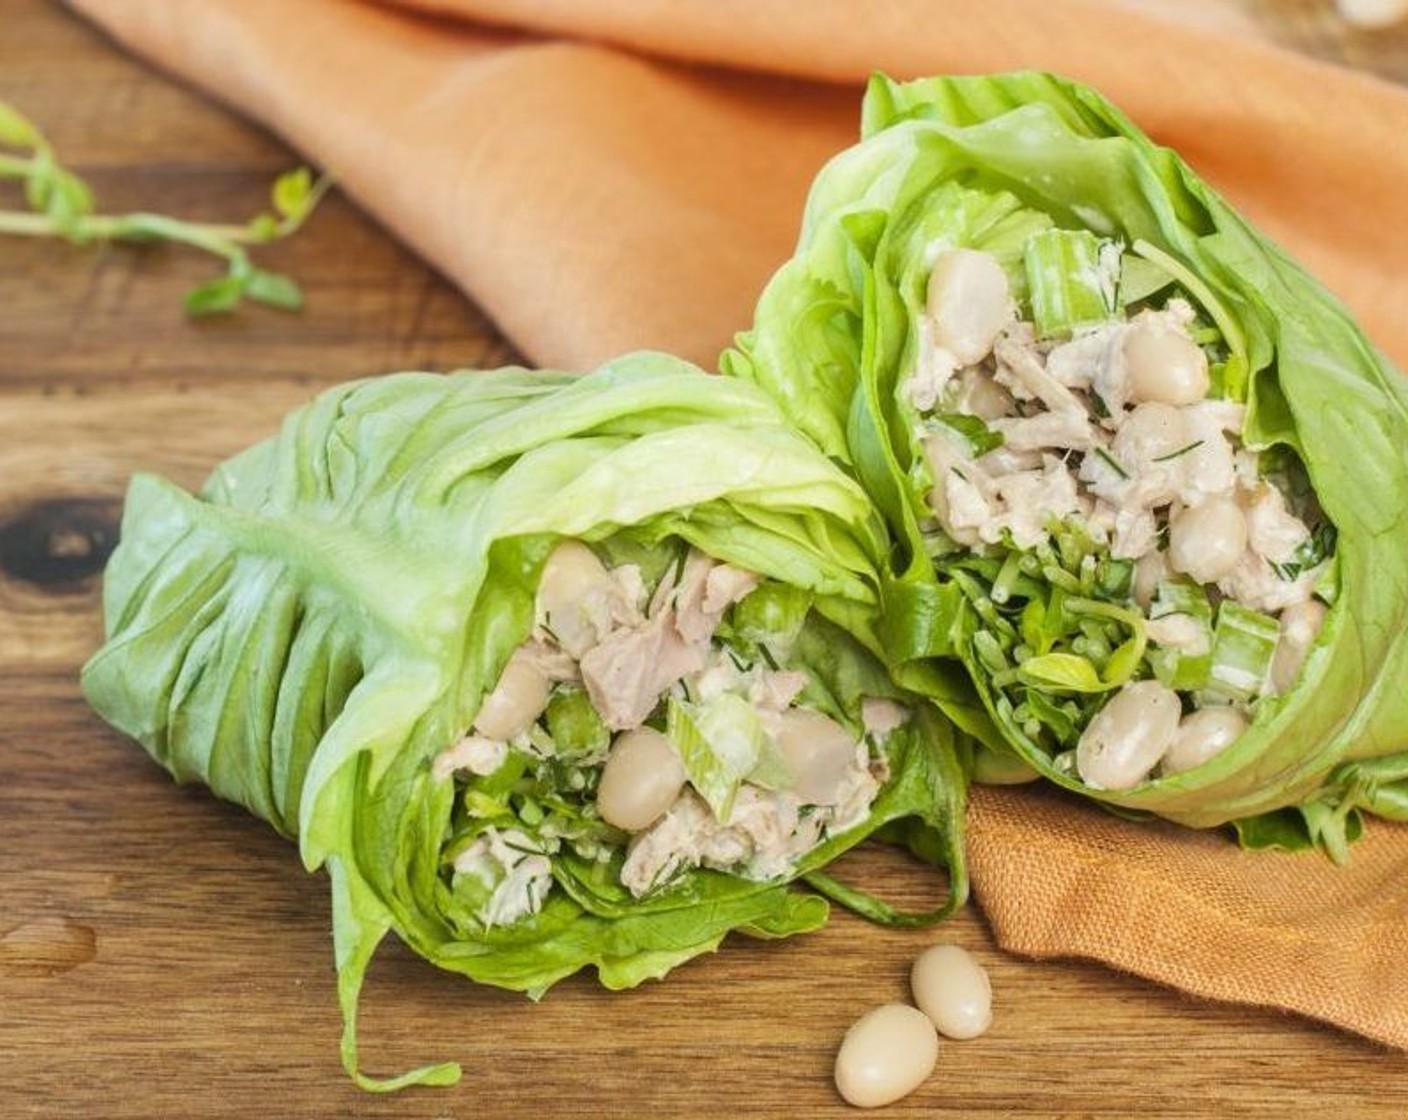 step 5 Wrap lettuce around the salad, tucking in the ends as you roll, much like a cabbage roll. Cut in half and serve immediately.